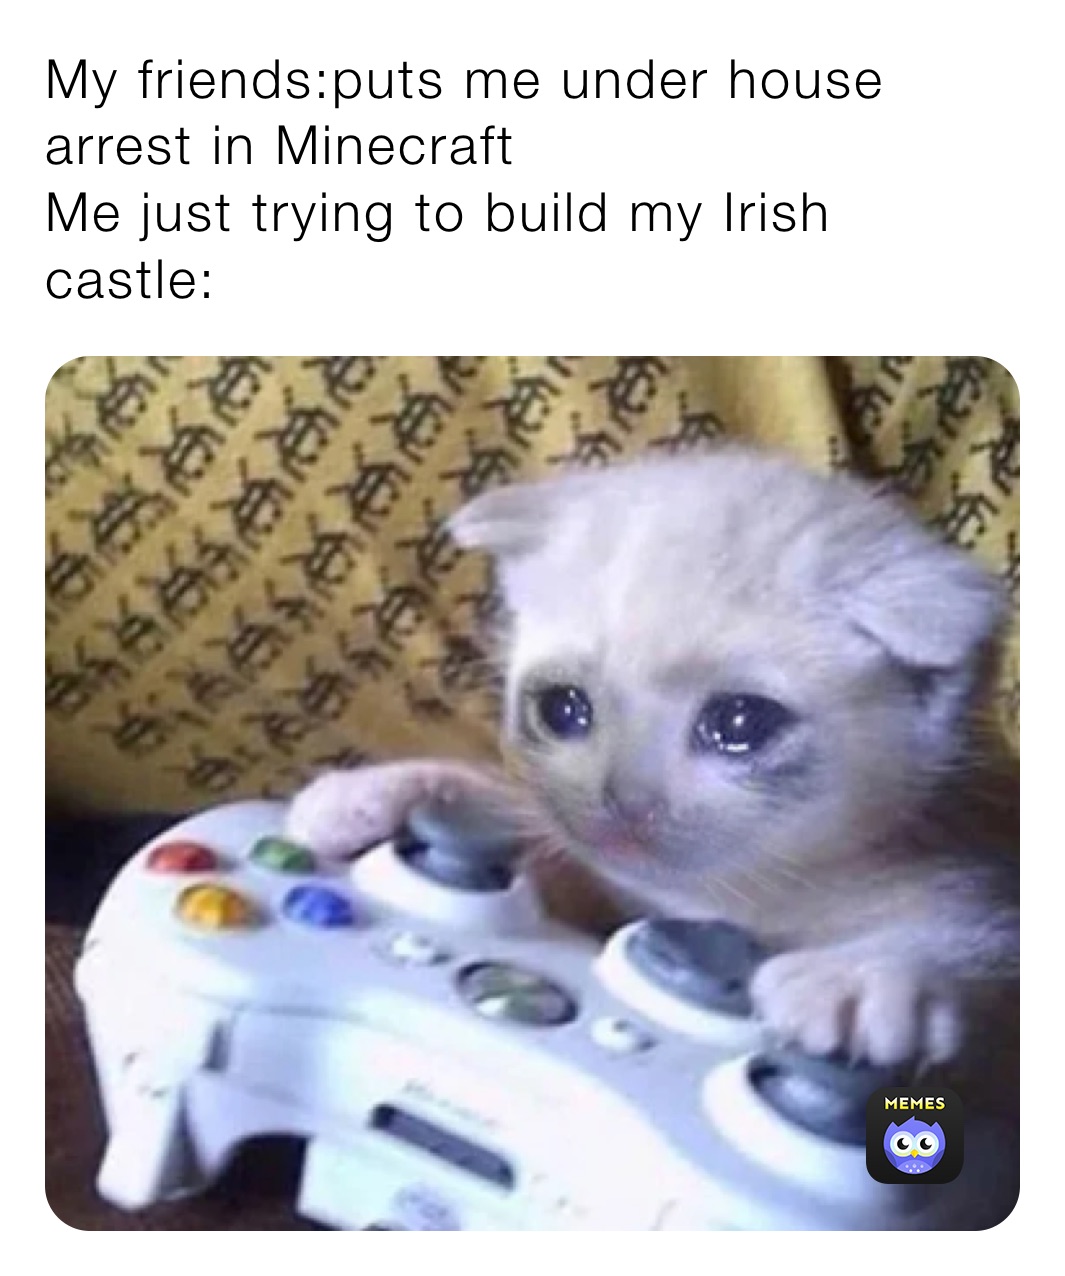 My friends:puts me under house arrest in Minecraft
Me just trying to build my Irish castle: